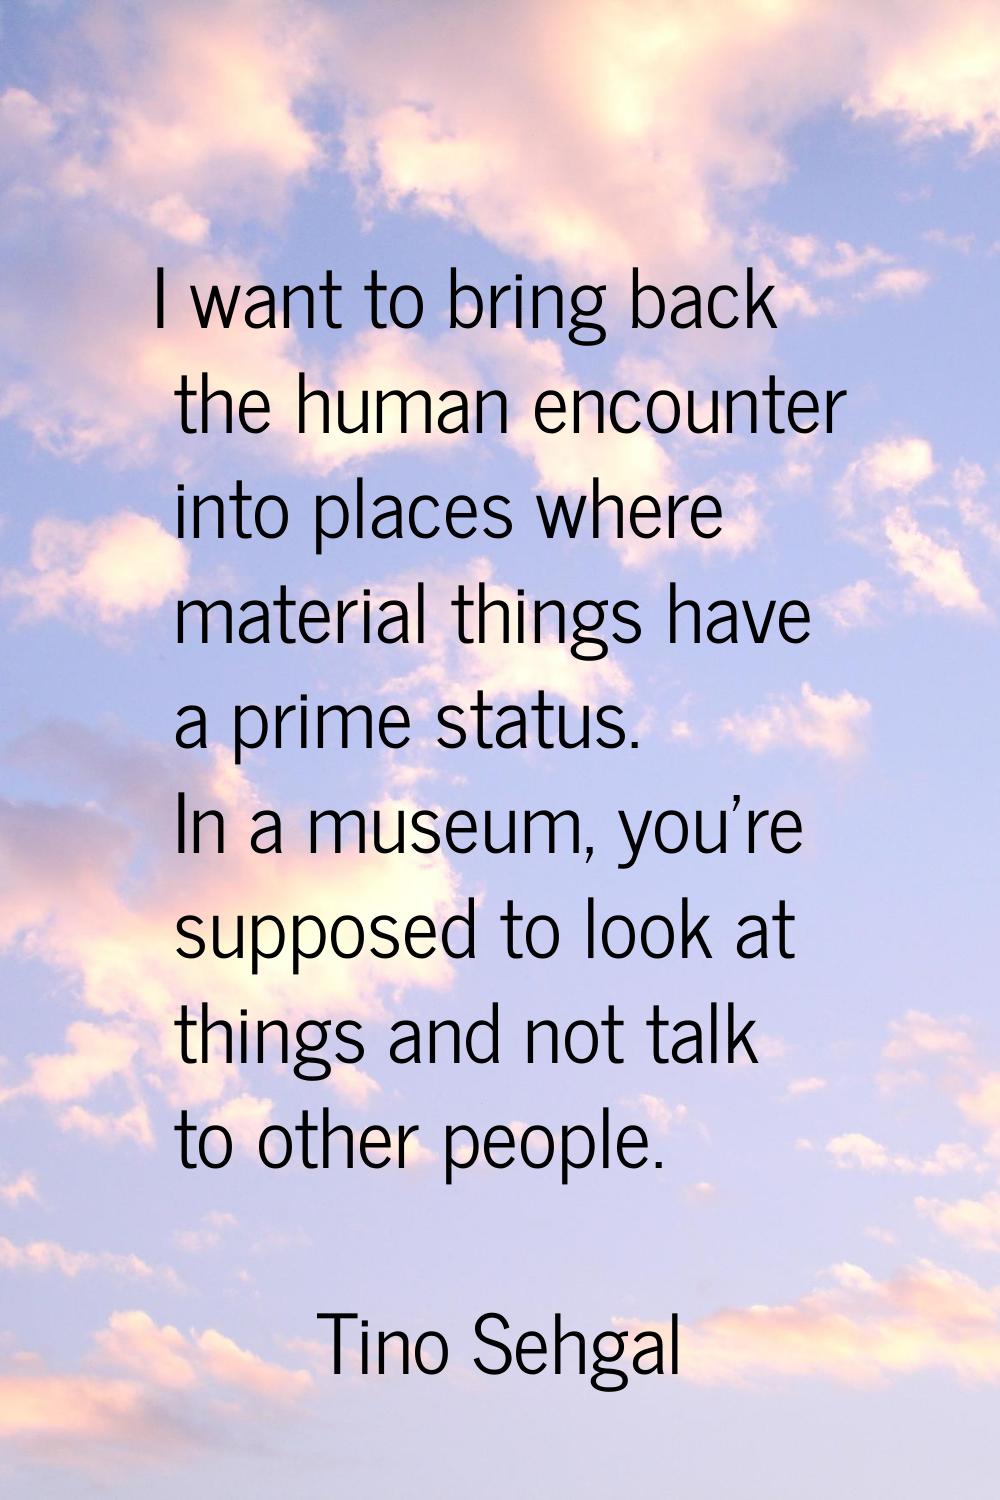 I want to bring back the human encounter into places where material things have a prime status. In 